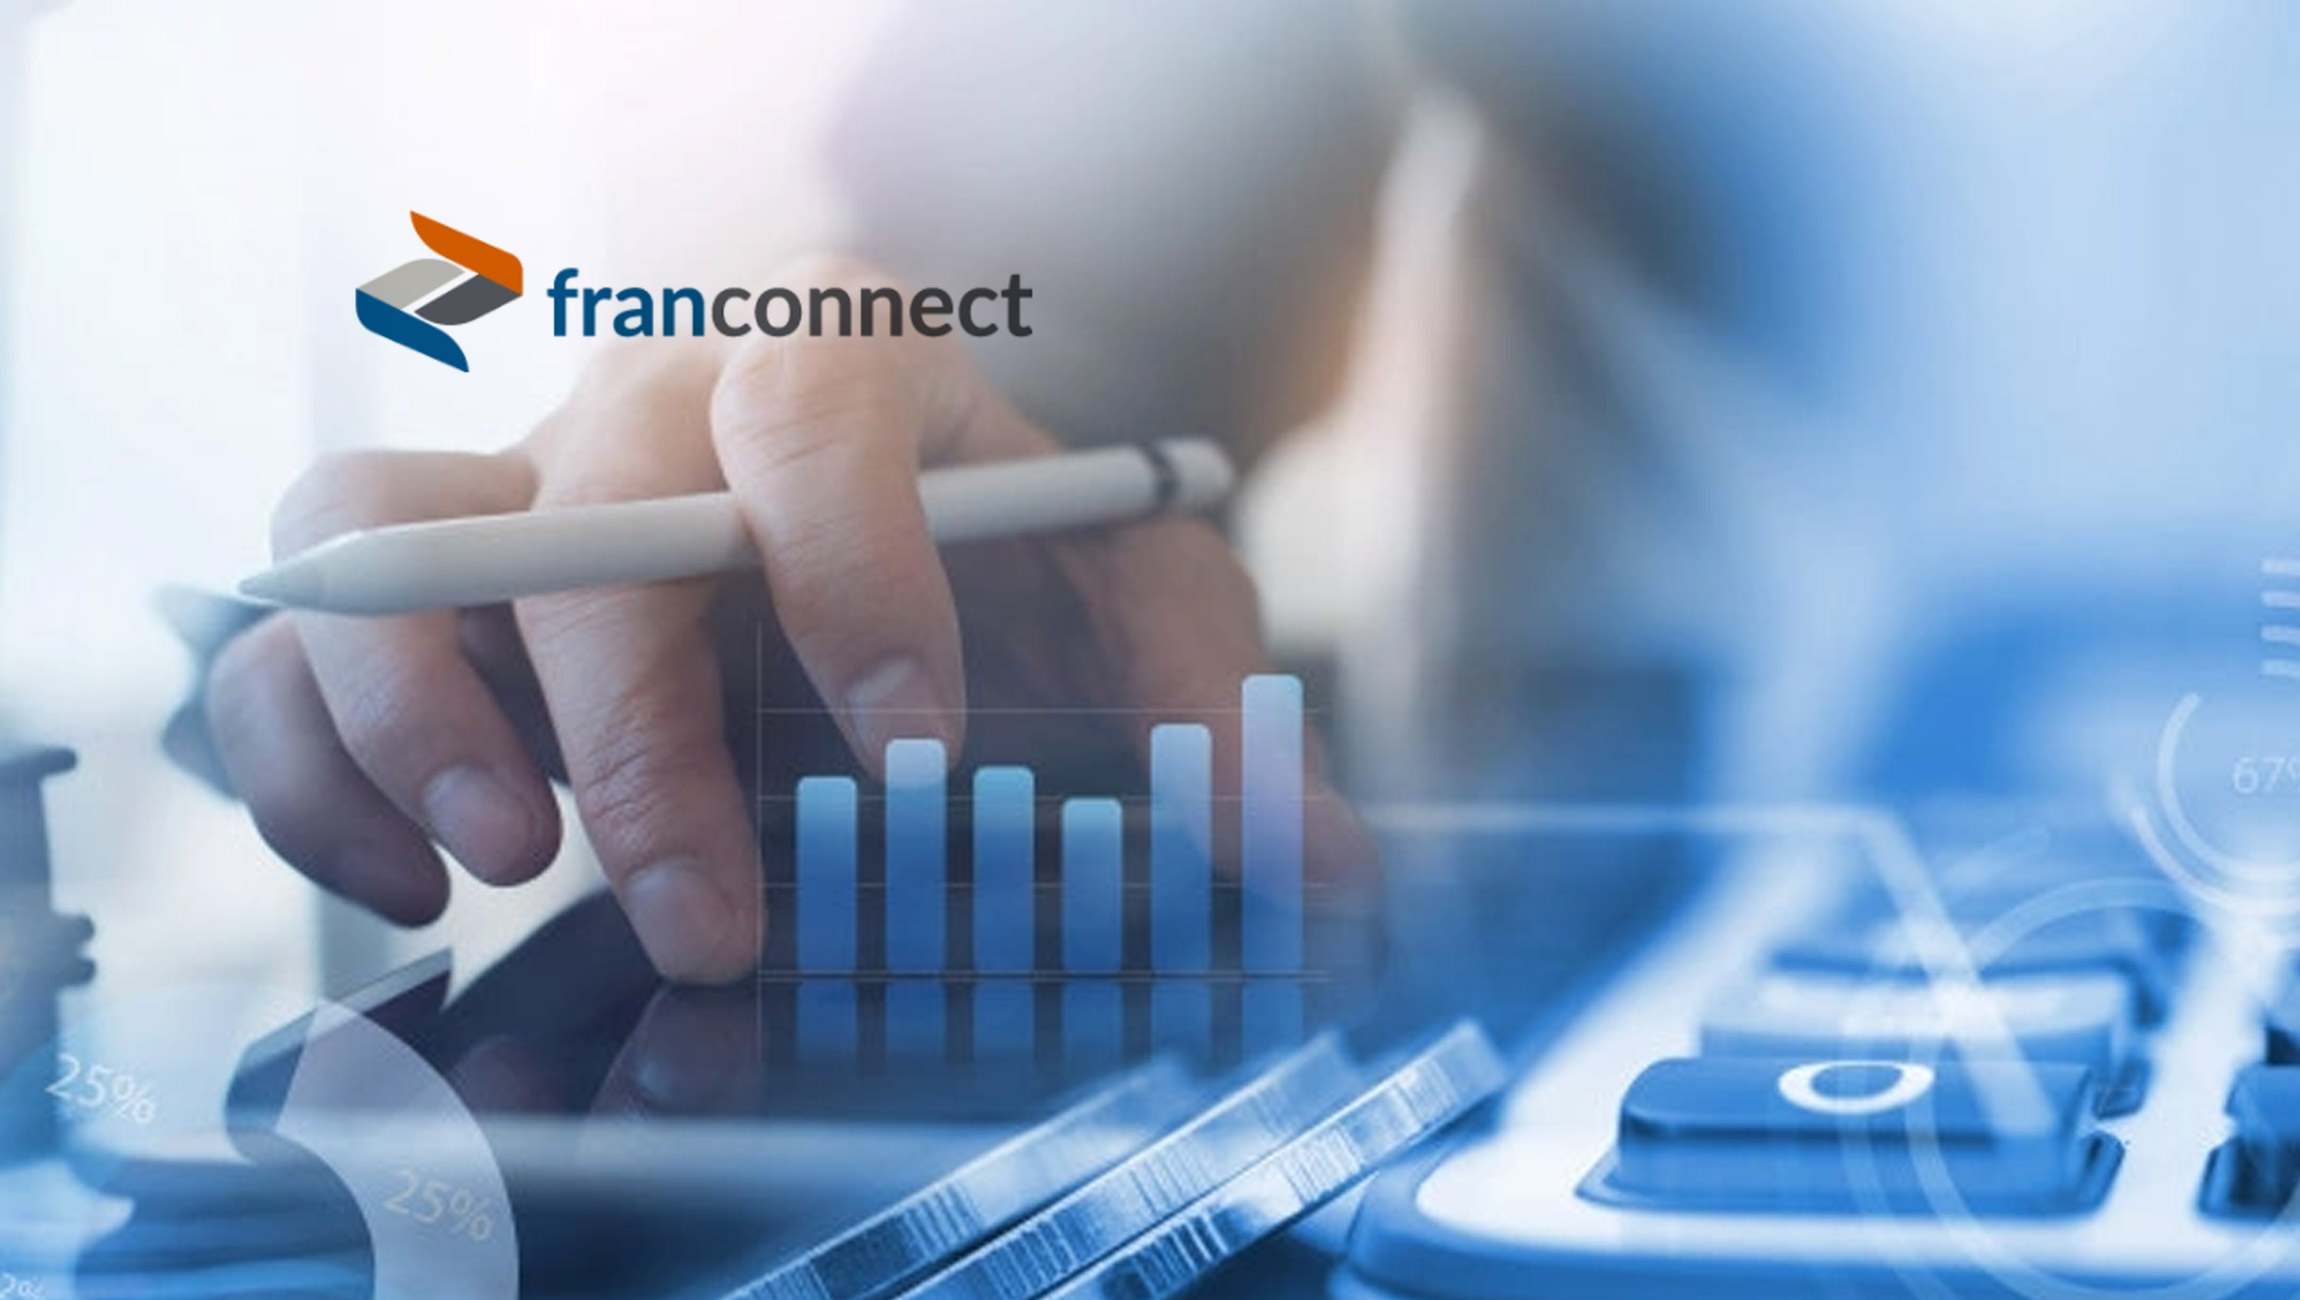 FranConnect Reports Record Sales Growth in 2021